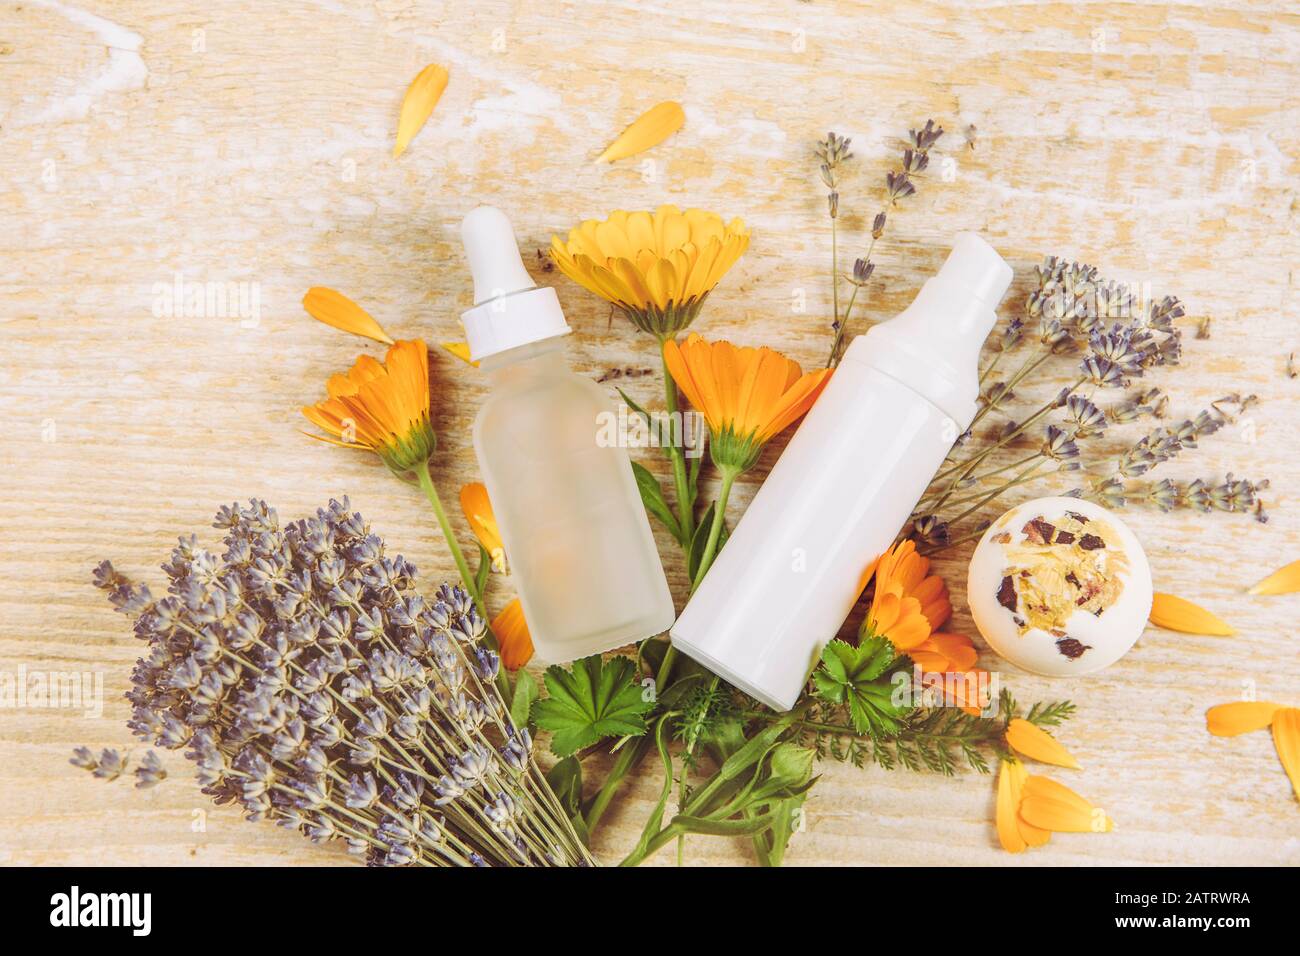 Organic plant based cosmetics concept. Top view of various herbs plants and beauty product containers on wood textured background, lot of copy space. Stock Photo